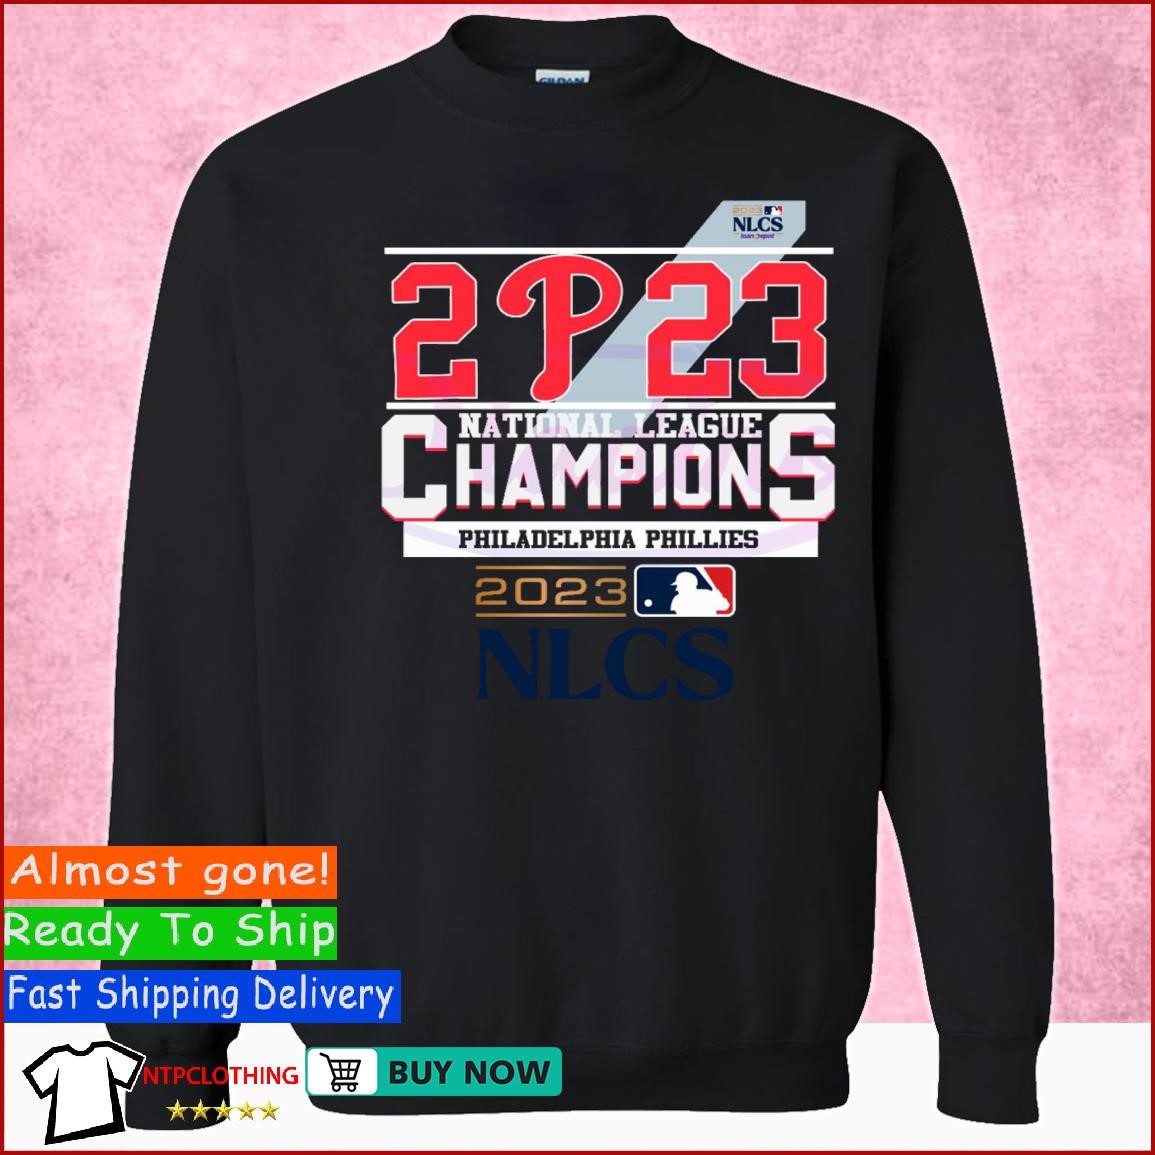 Phillies National League Champions gear, get yours now